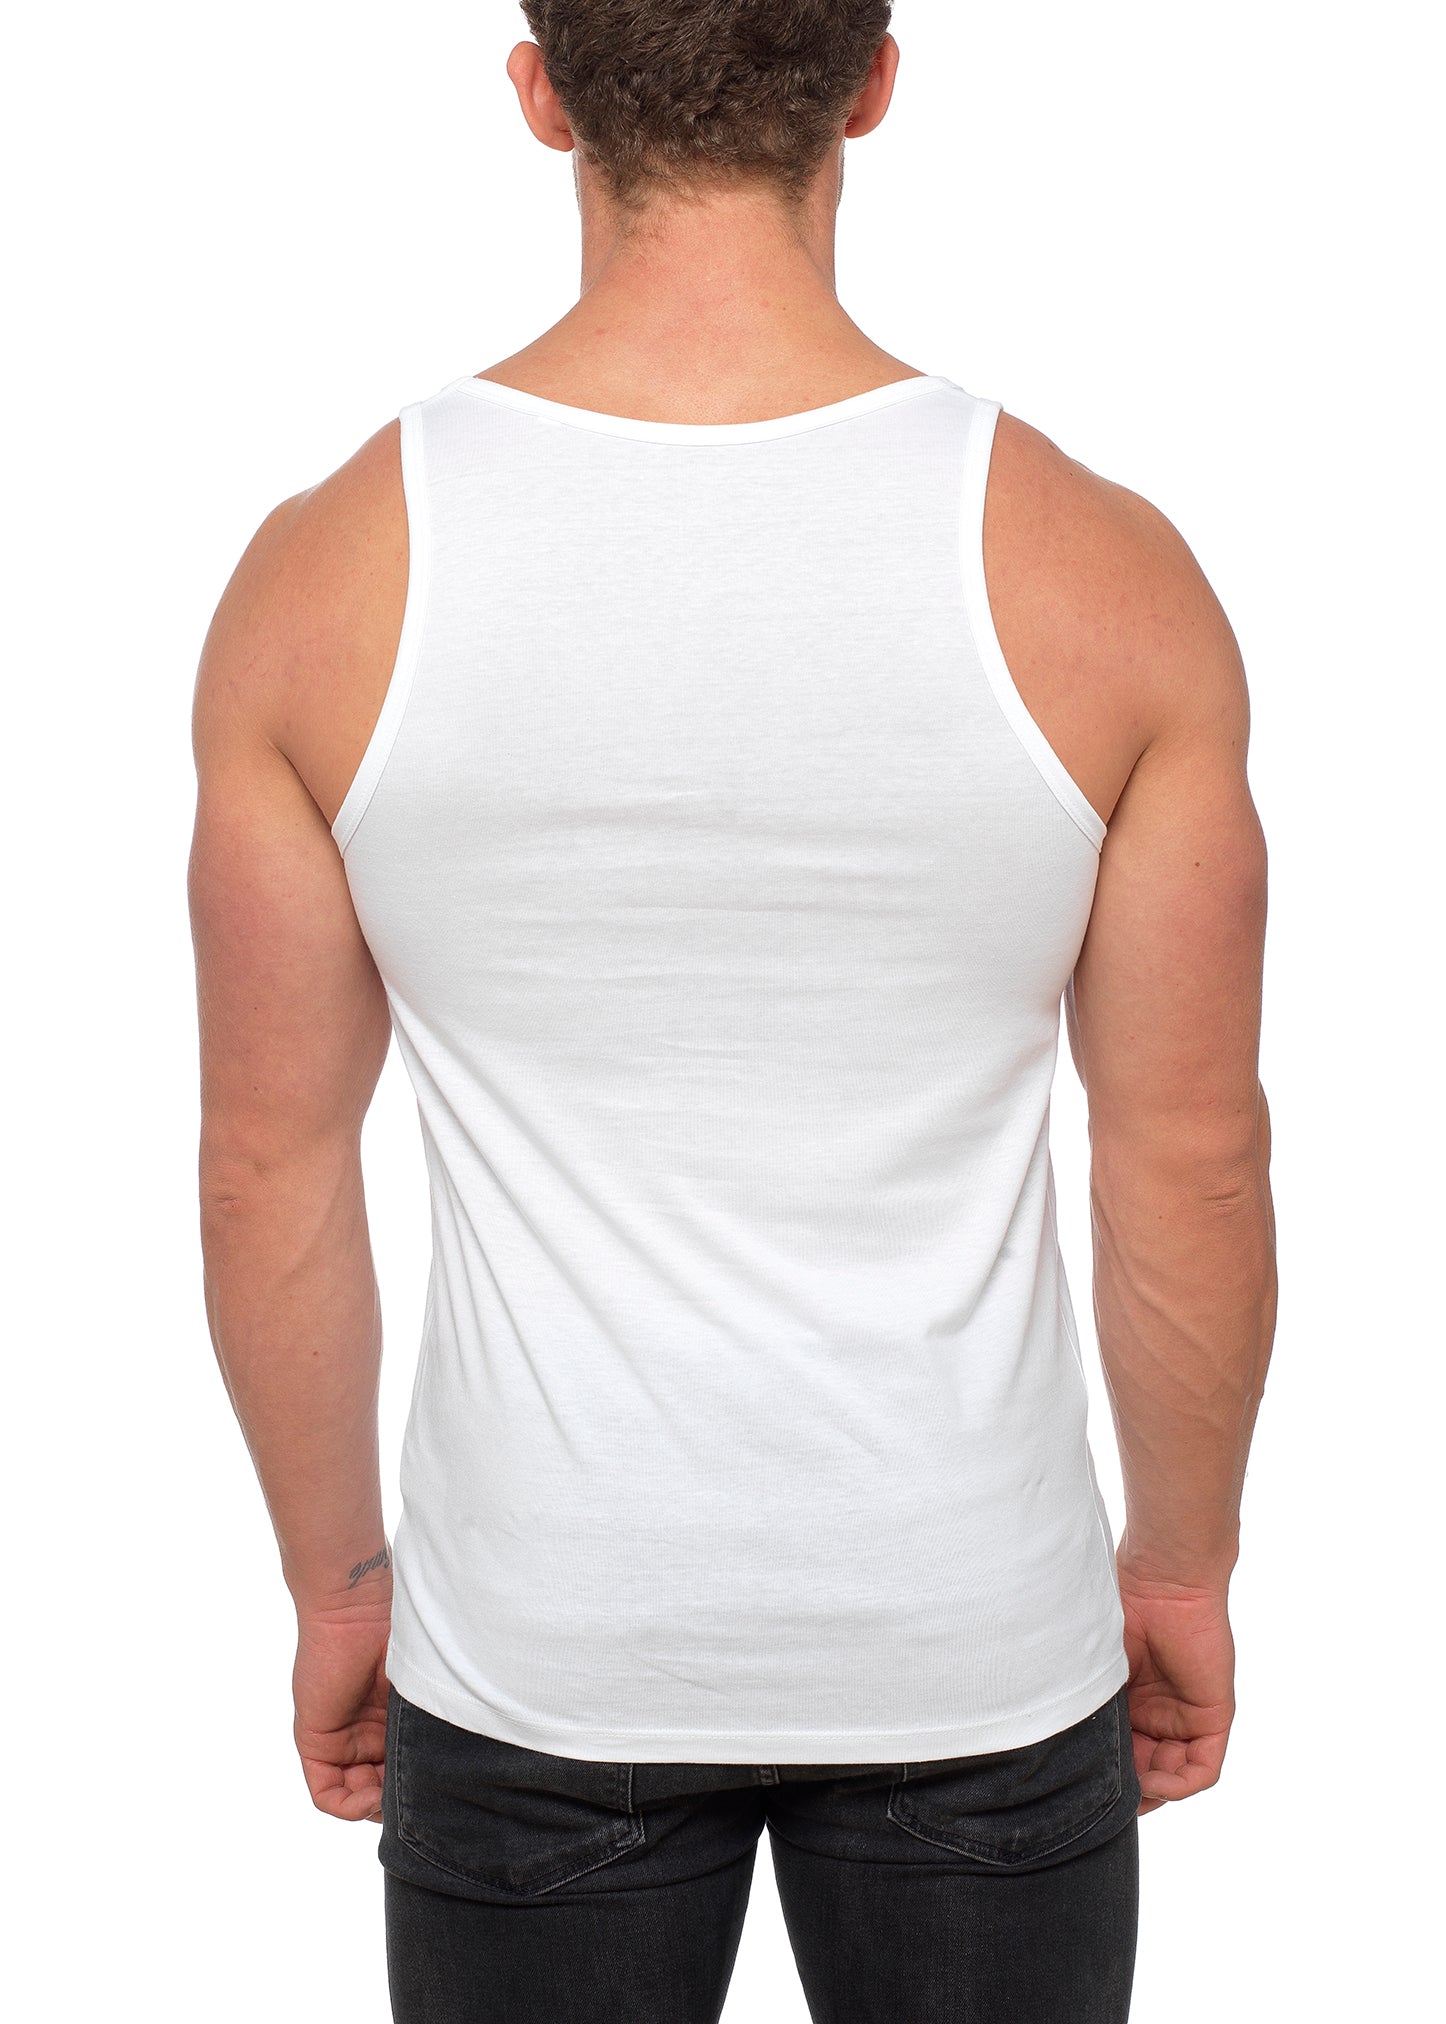 Mens White Muscle Fit Vests